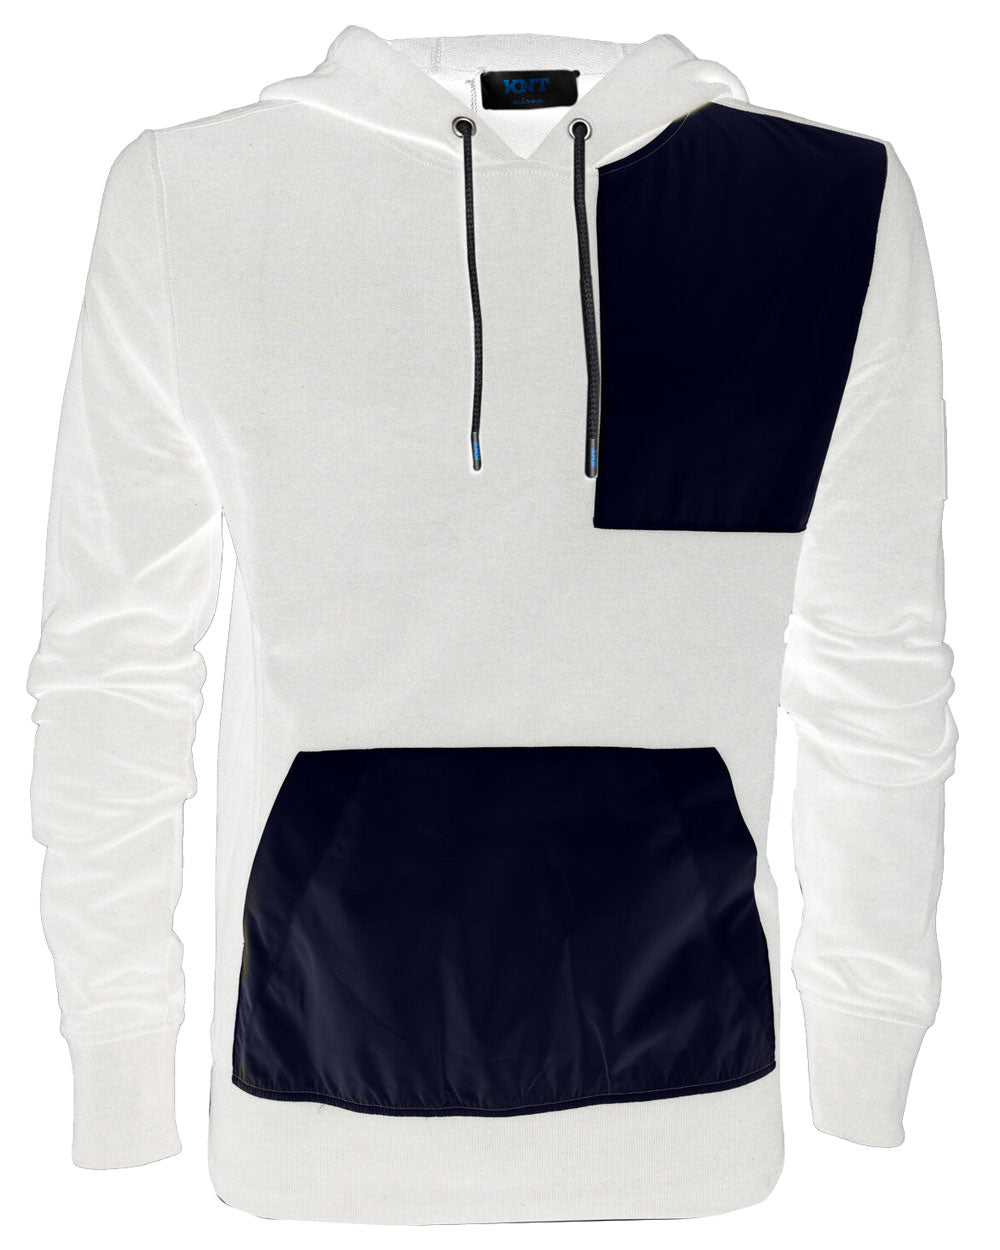 White and Navy Color Blocked Cotton Sweatshirt